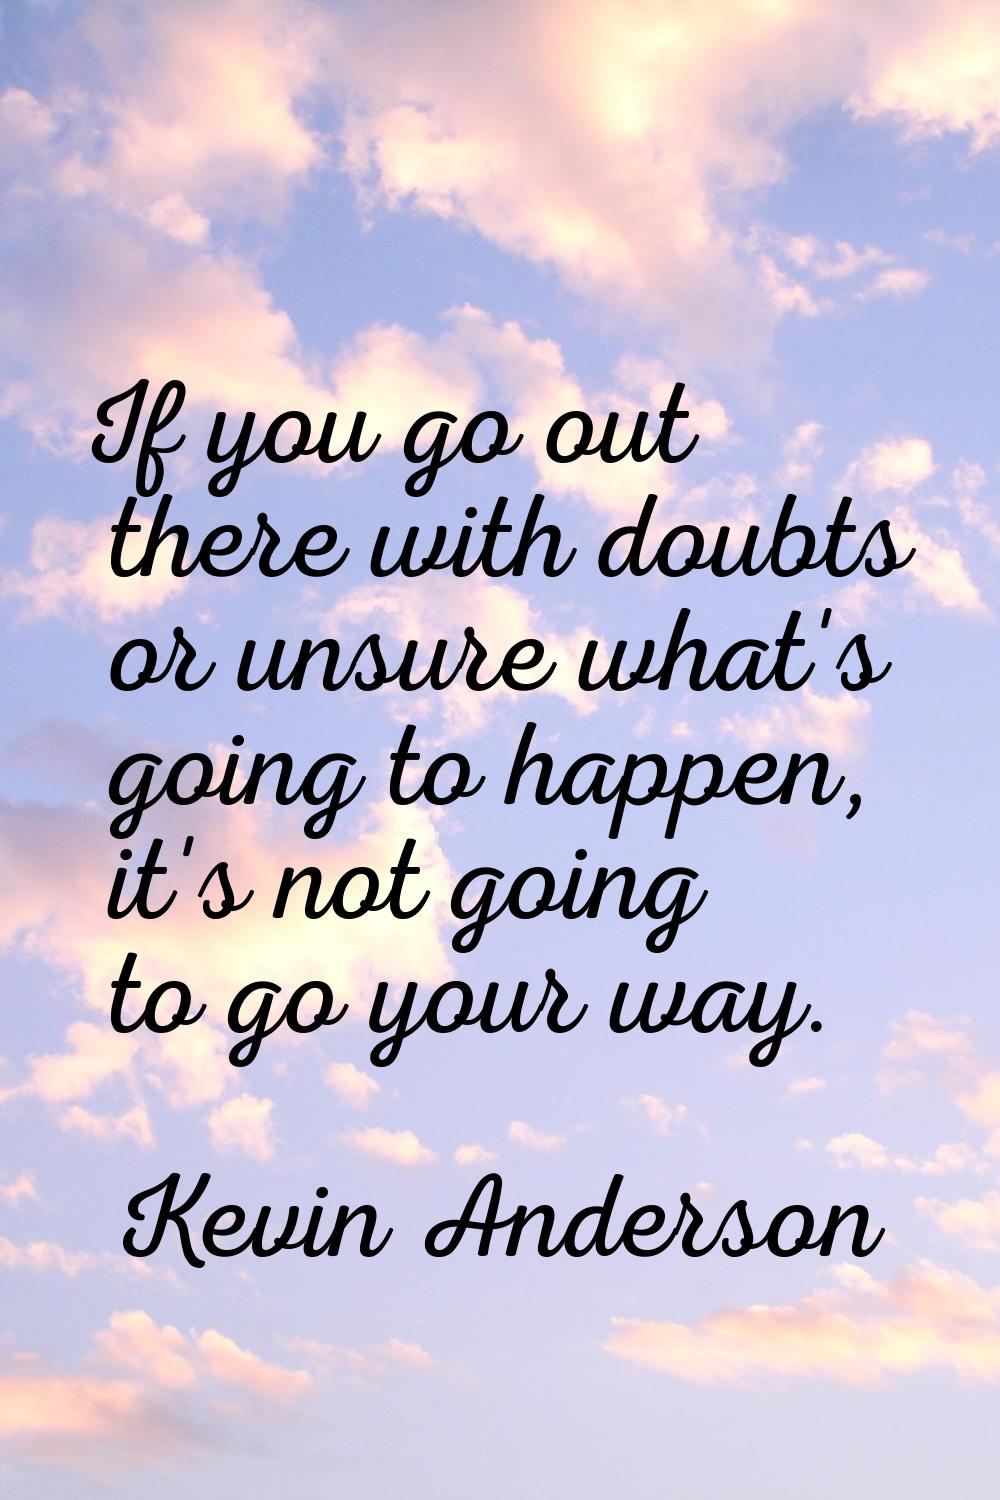 If you go out there with doubts or unsure what's going to happen, it's not going to go your way.